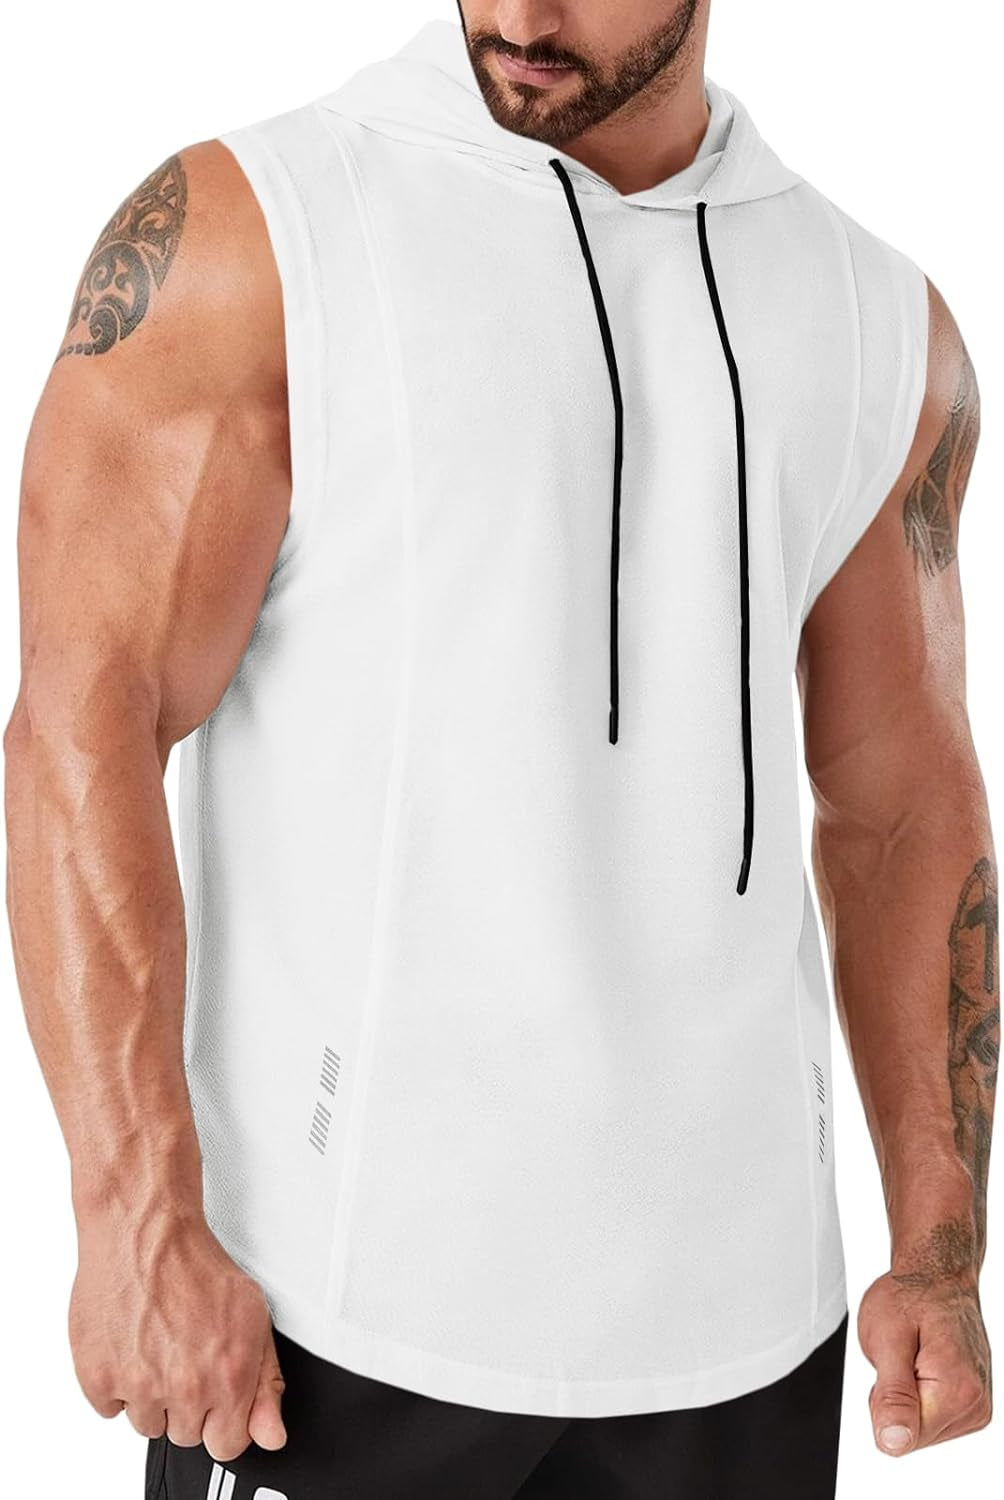 Mens Workout Hooded Tank Tops Gym Sleeveless Hoodies Bodybuilding Cut off Muscle T-Shirts